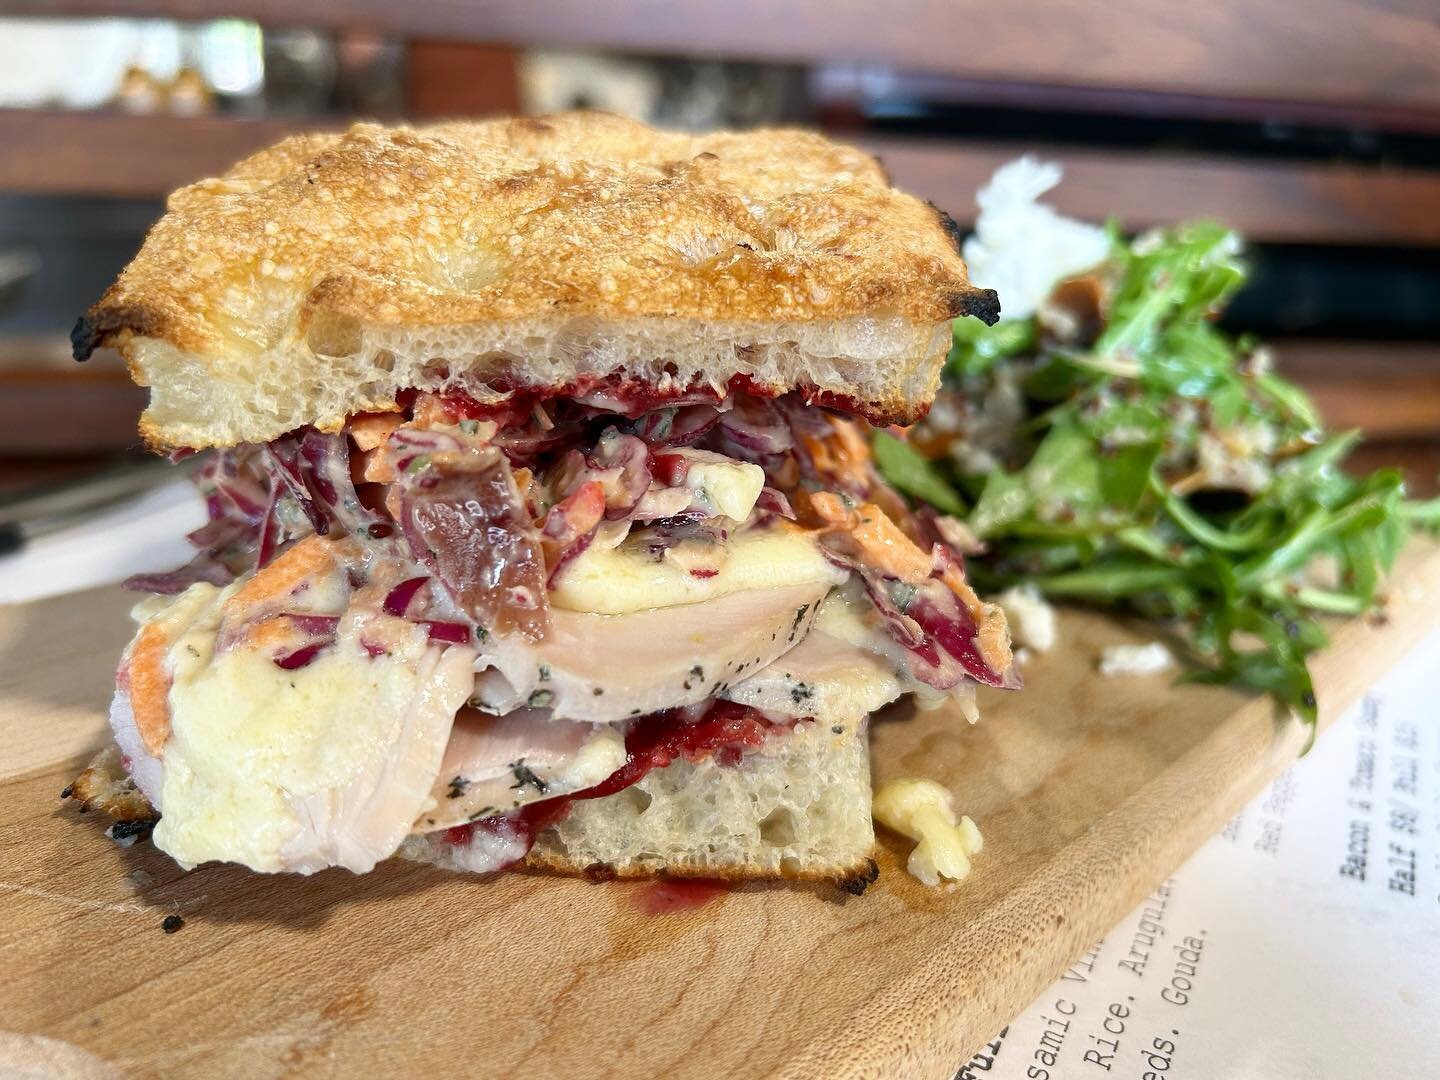 &ldquo;You&rsquo;re gunna need a bath after that one&rdquo;- Braden, owner 
( said As he demos pictured sandwich between washing his hands at the sink)

The holiday shower Sammy. 
Herbed turkey breast served warm with whipped Brie  on house focaccia 